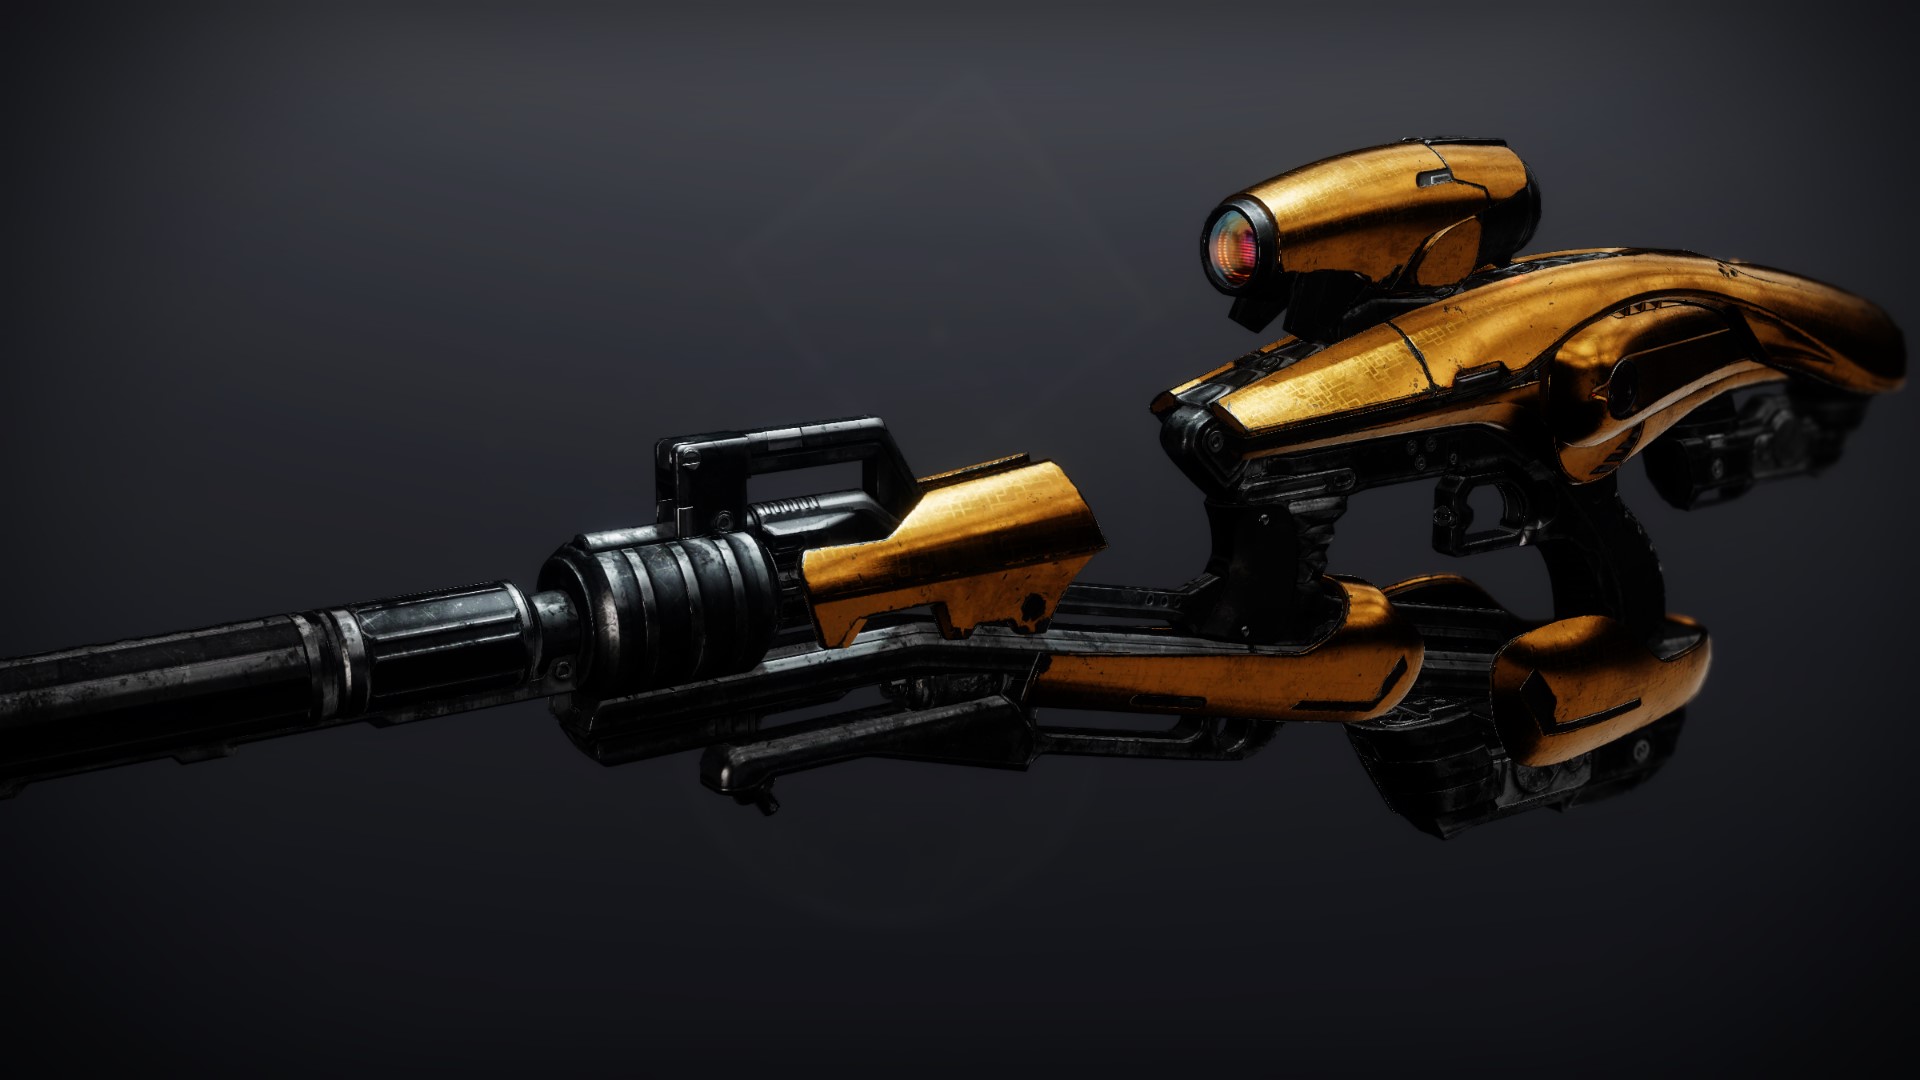 An in-game render of the Vex Mythoclast.